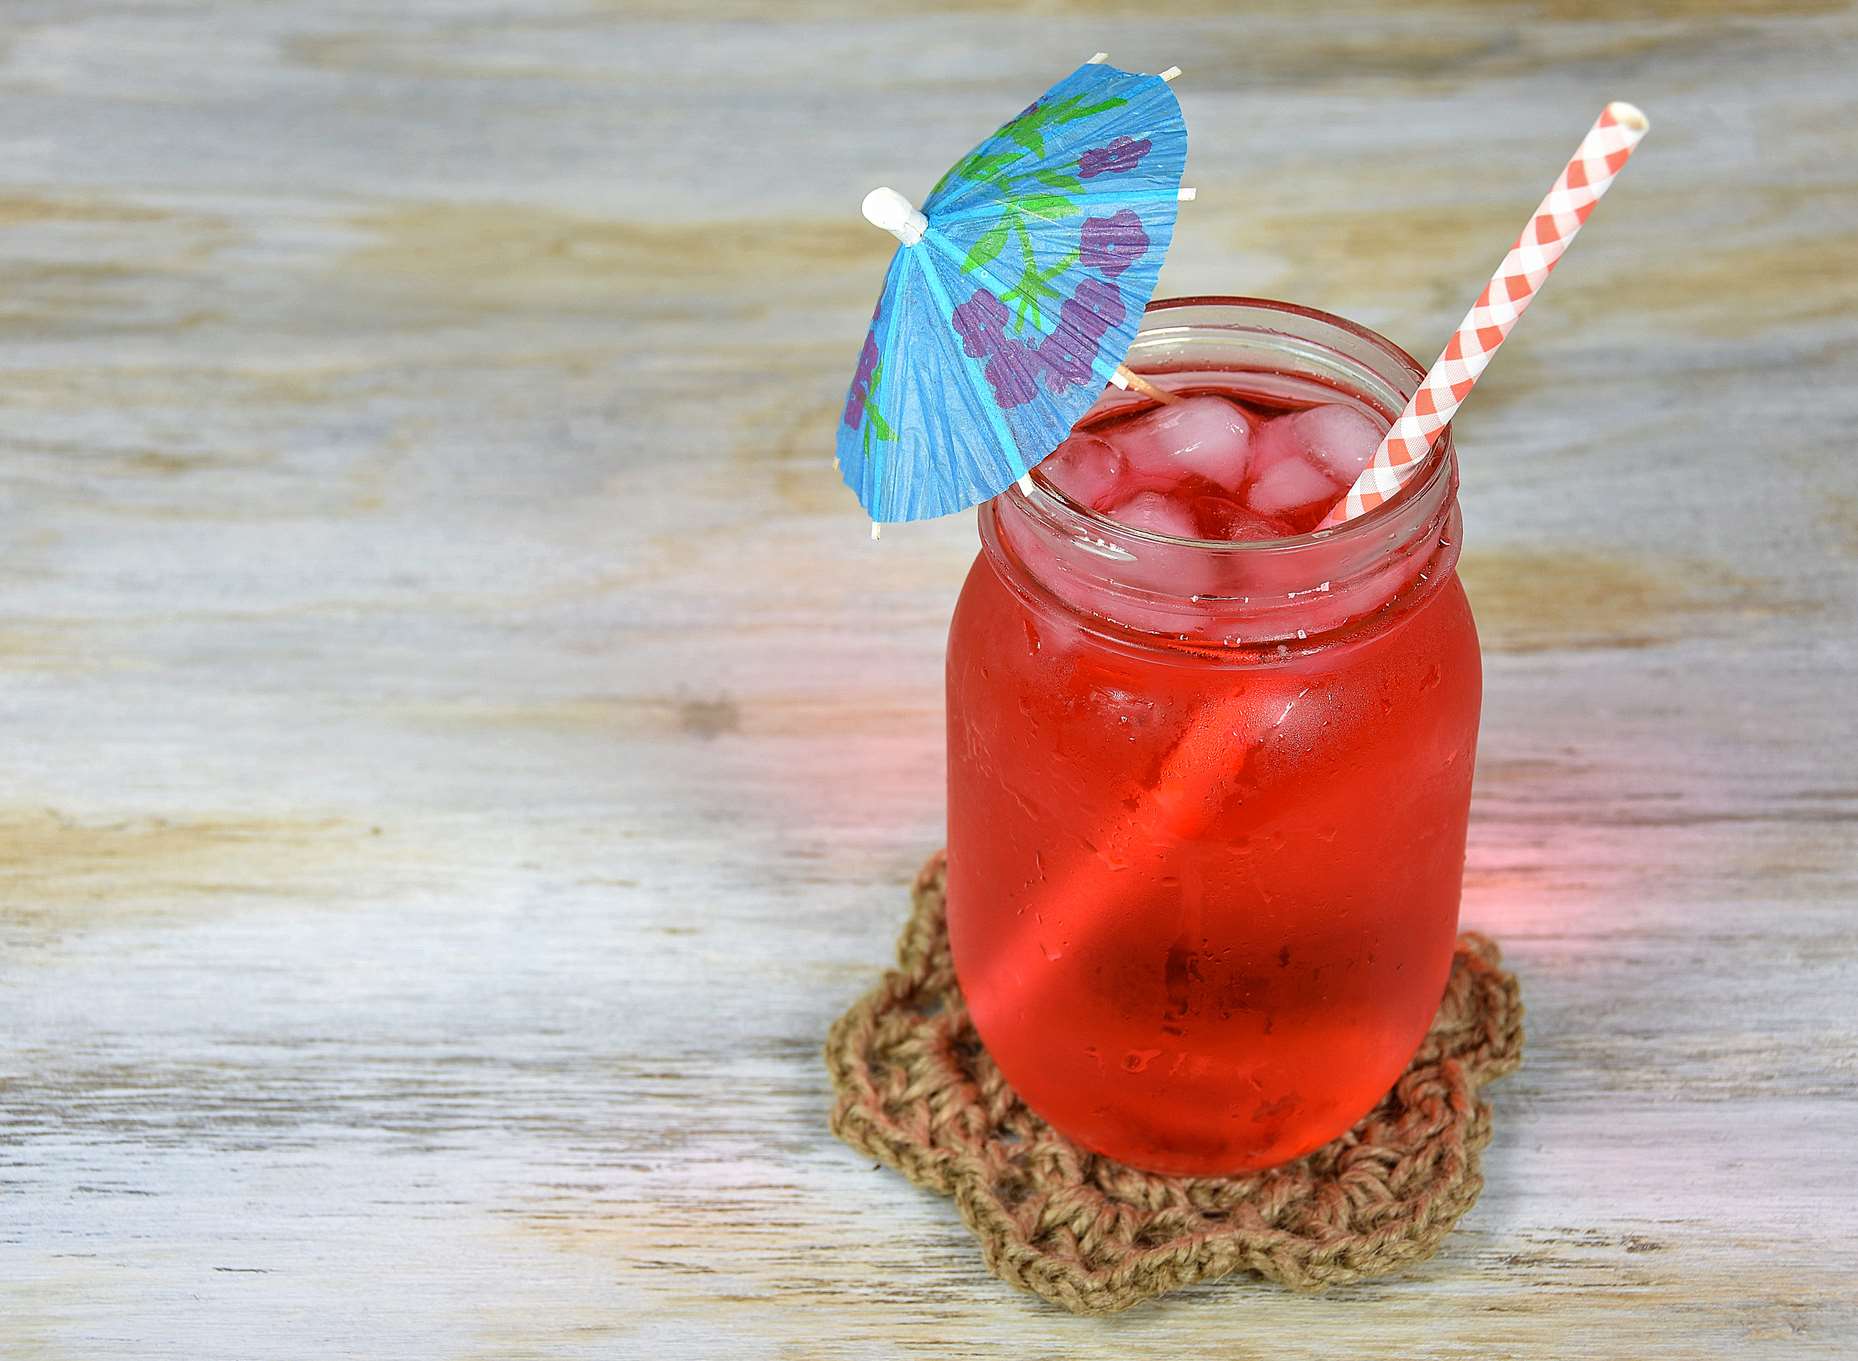 Cool off with a nice cold drink - but only if served in a mason jar